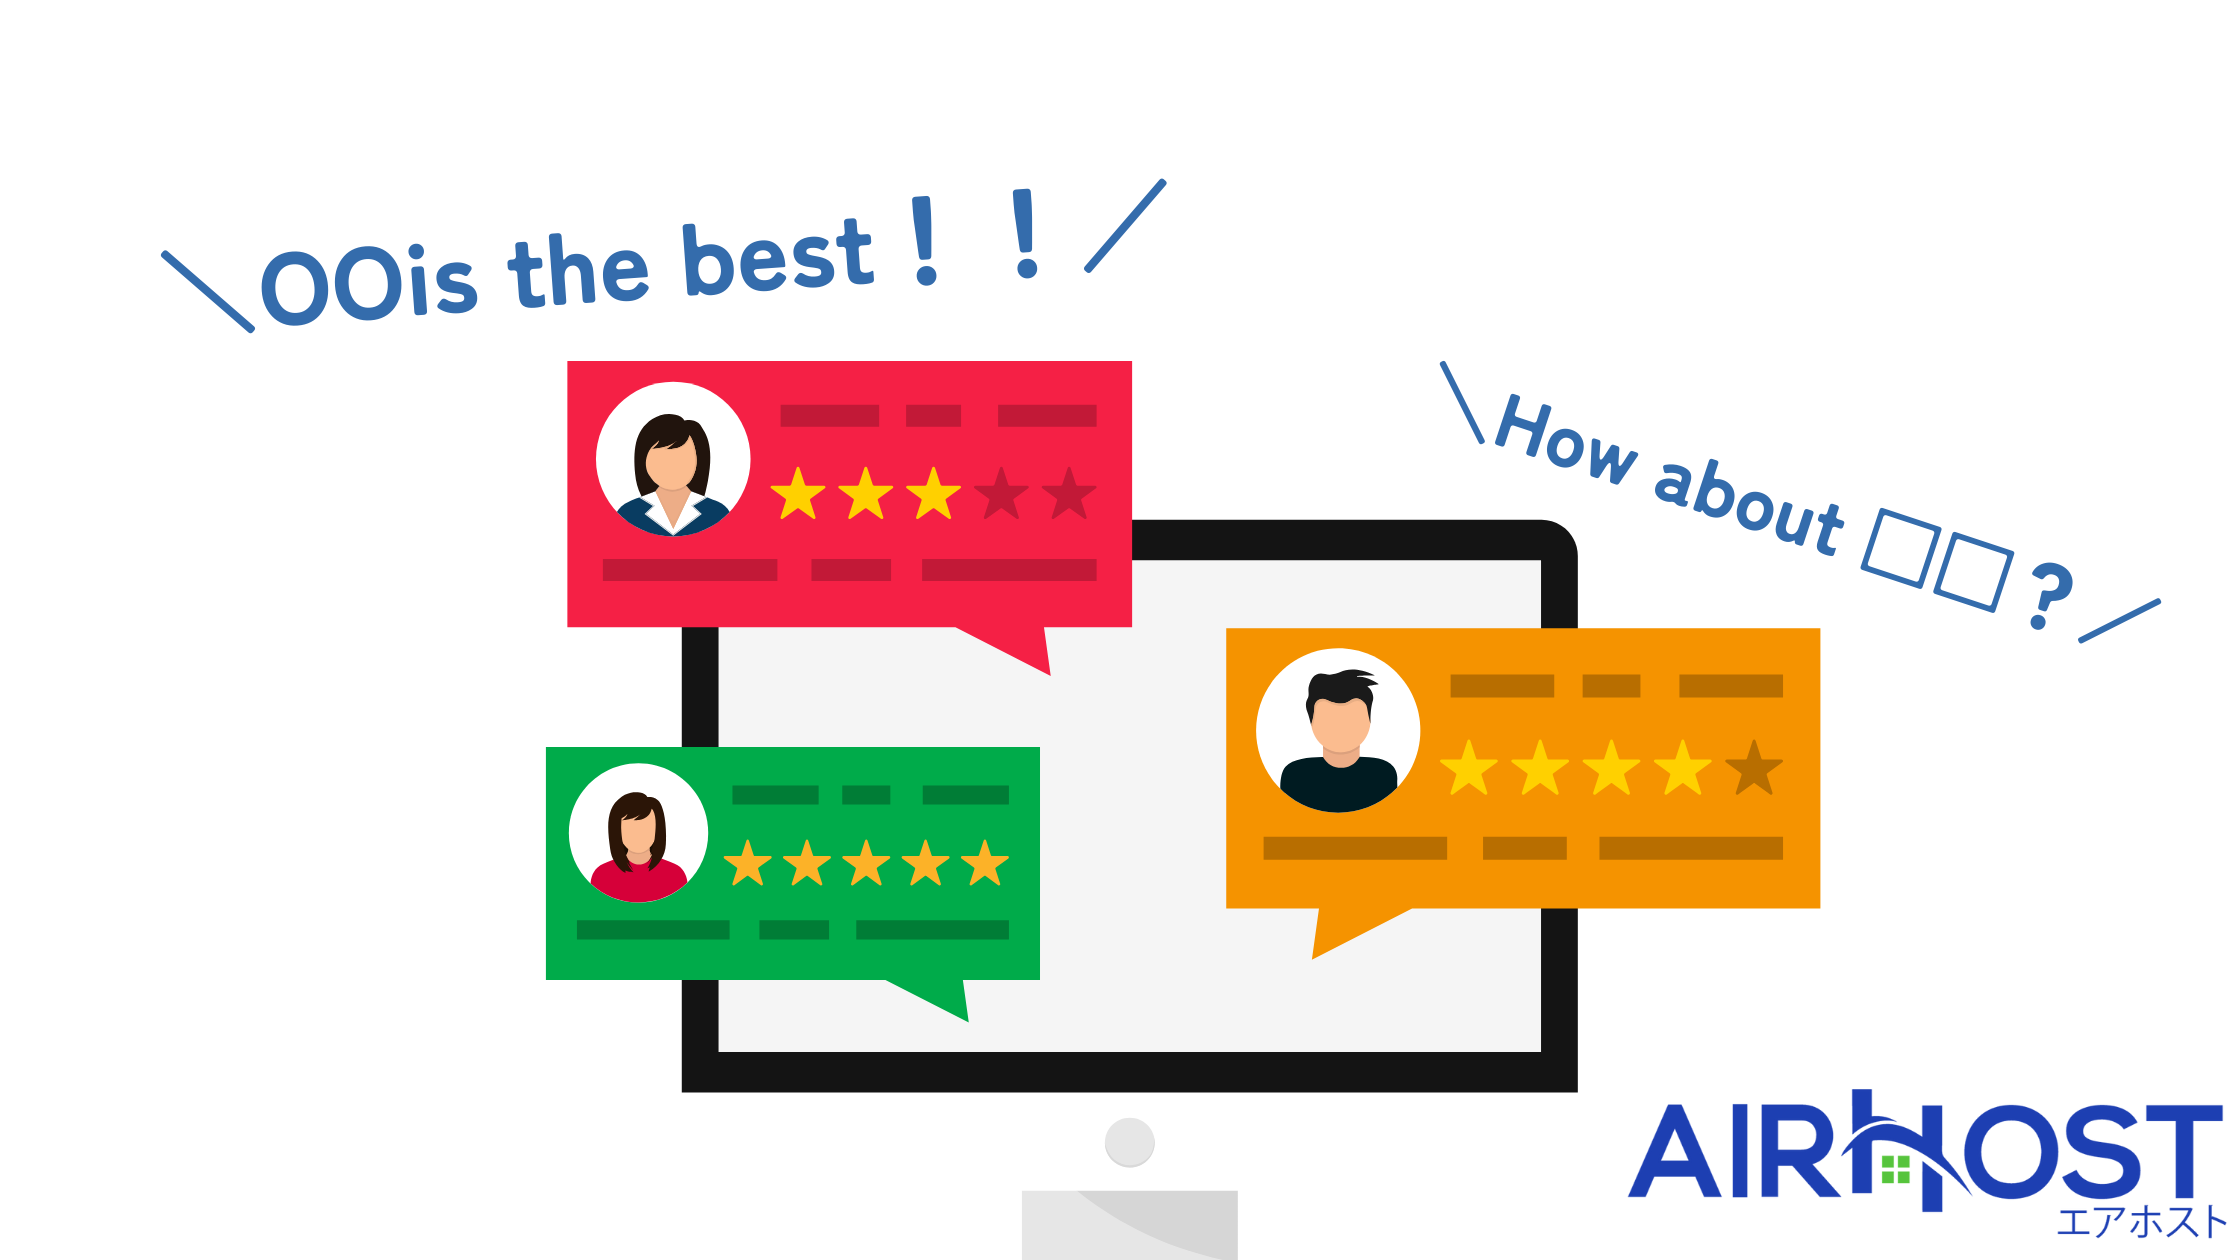 AirHost's reputation and reviews